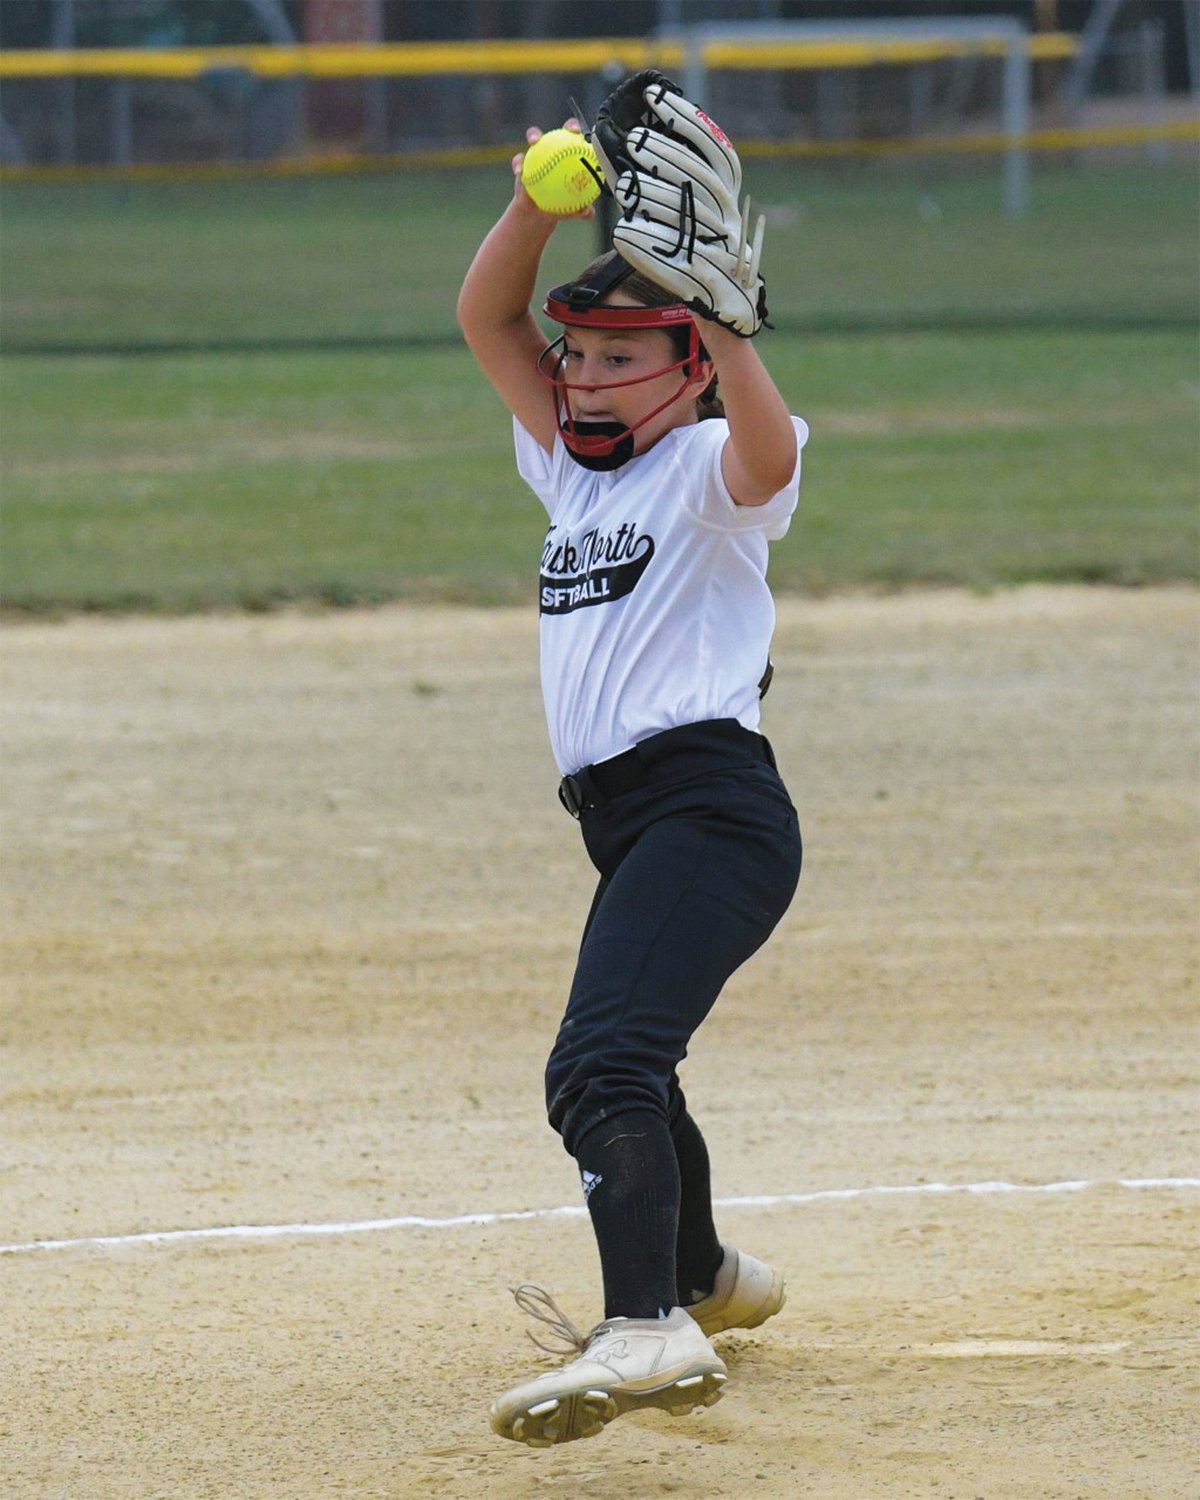 WINDING UP: Warwick North pitcher Teagan O’Reilly winds up to deliver last week in the state championship game.